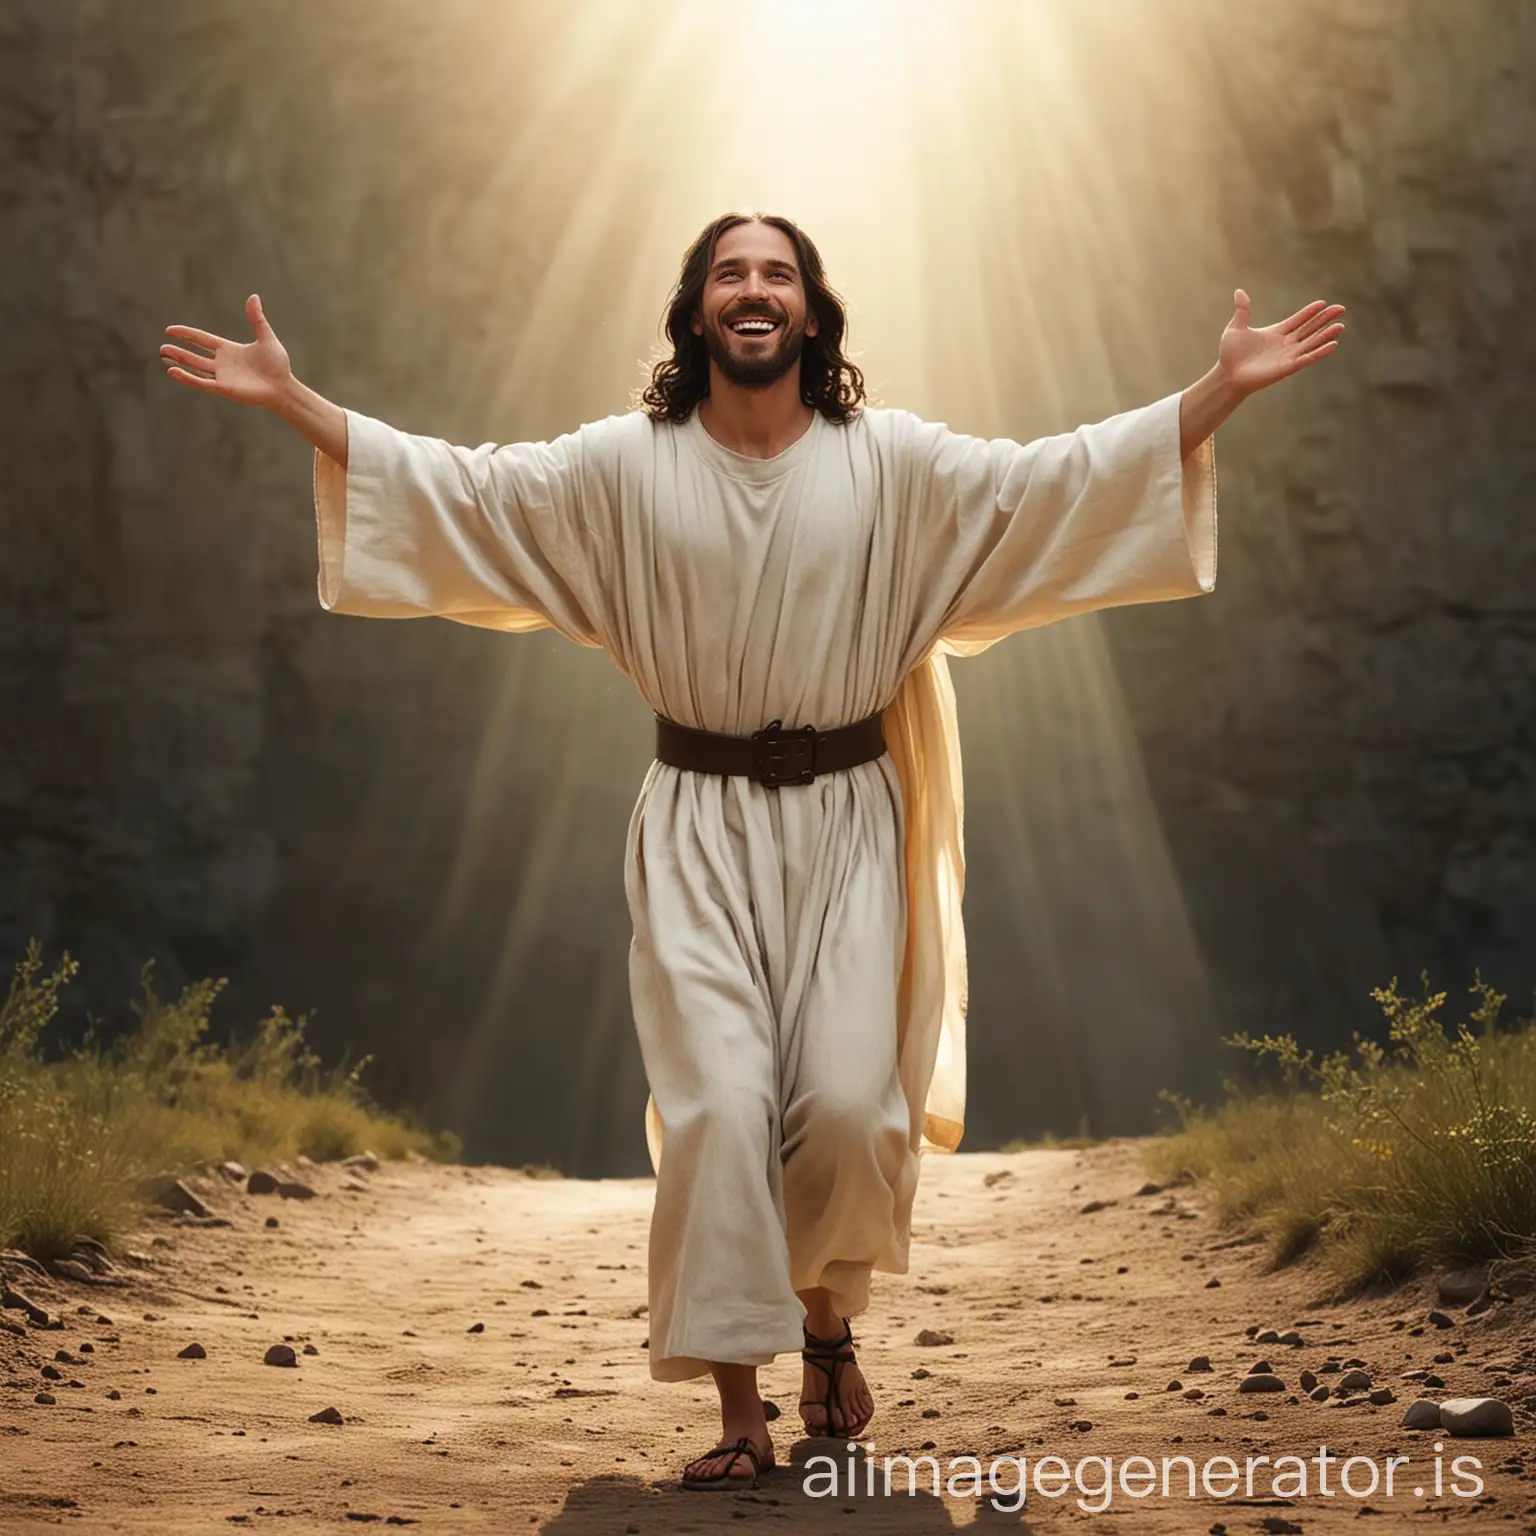 Smiling-Jesus-Walking-with-Open-Arms